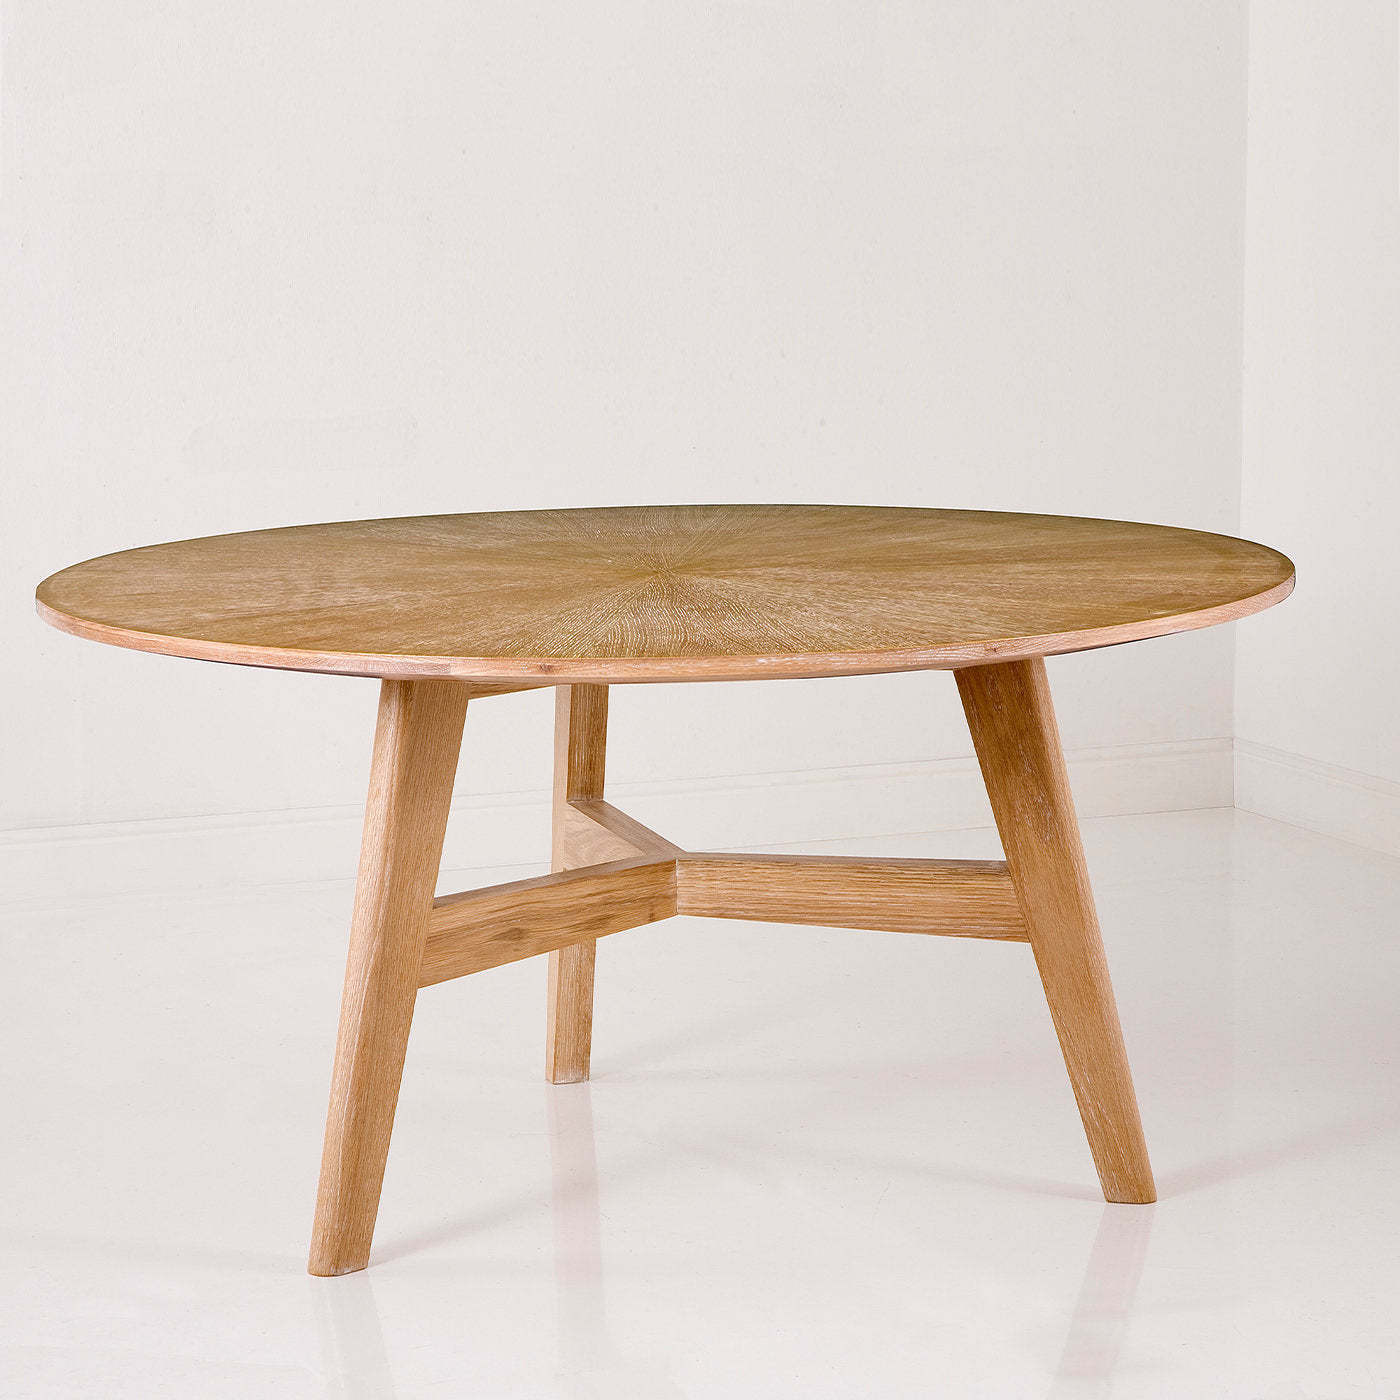 Round Dining Table with Leather Top by Michele Bonan - Alternative view 1